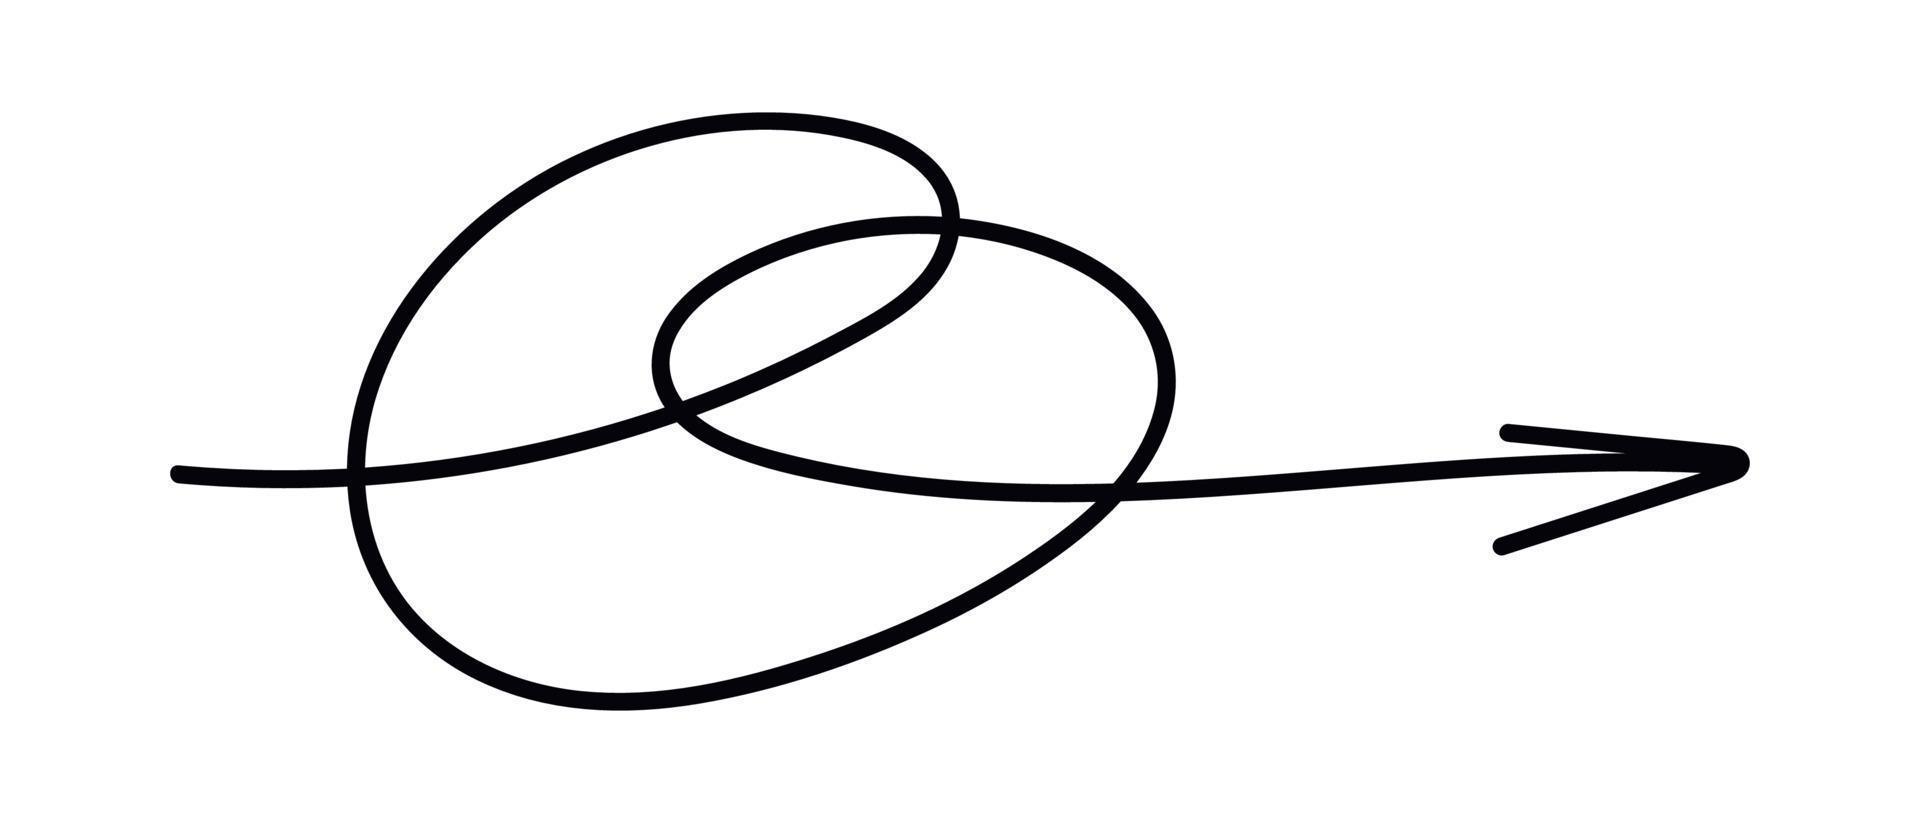 Doodle line arrow. Hand drawn scribble spiral arrow. Vector isolated illustration